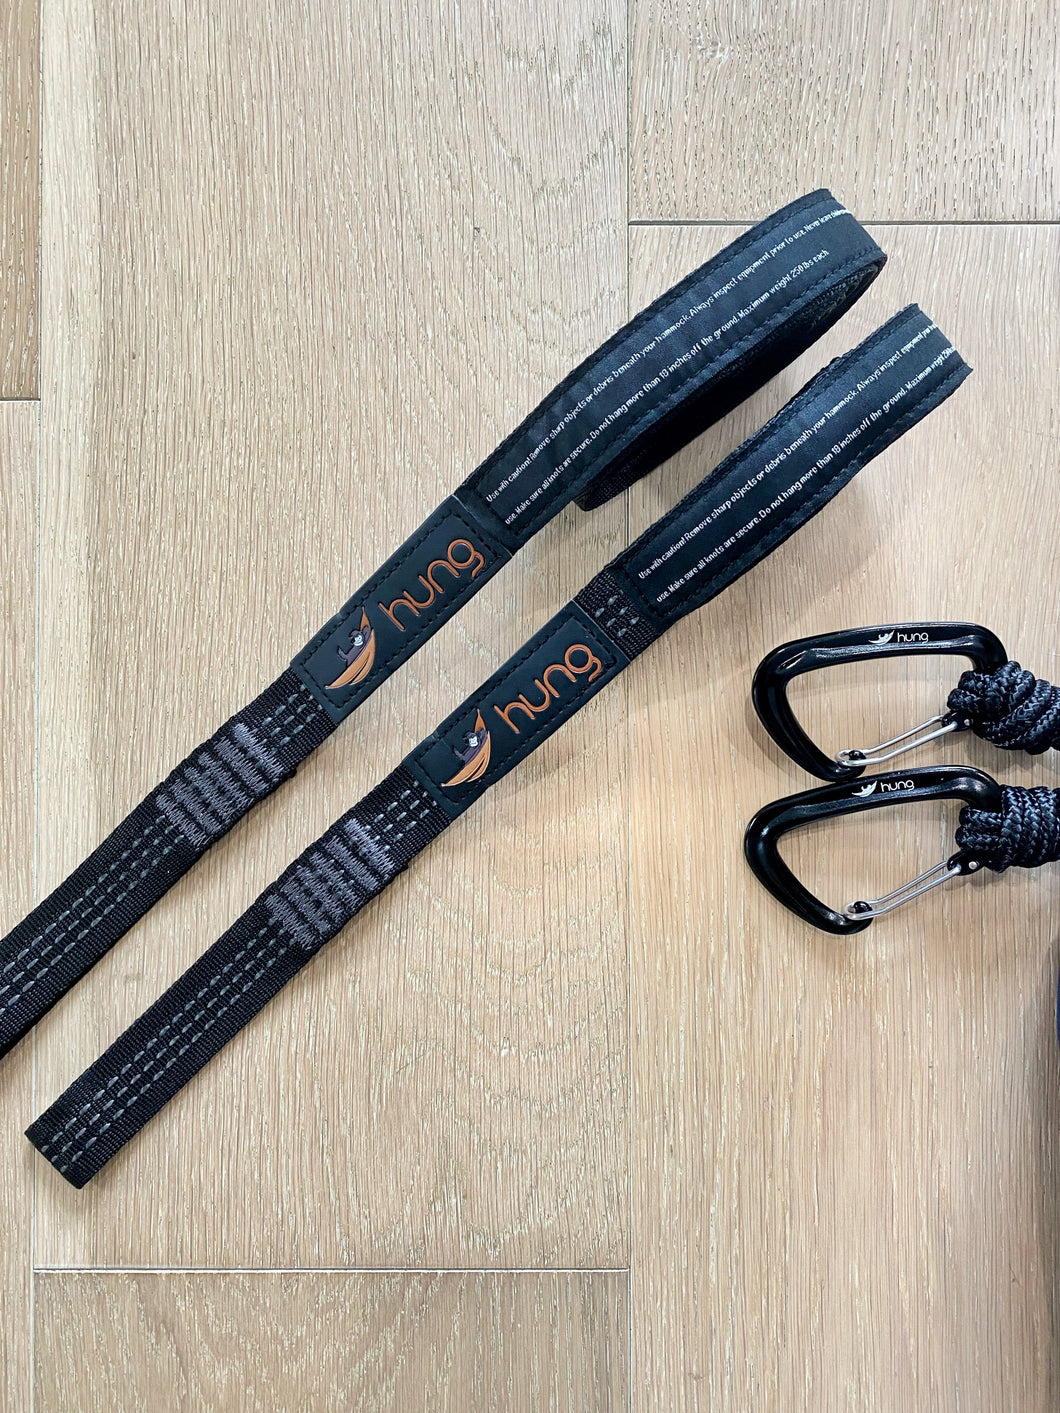 replacement straps and 'hung' carabiners